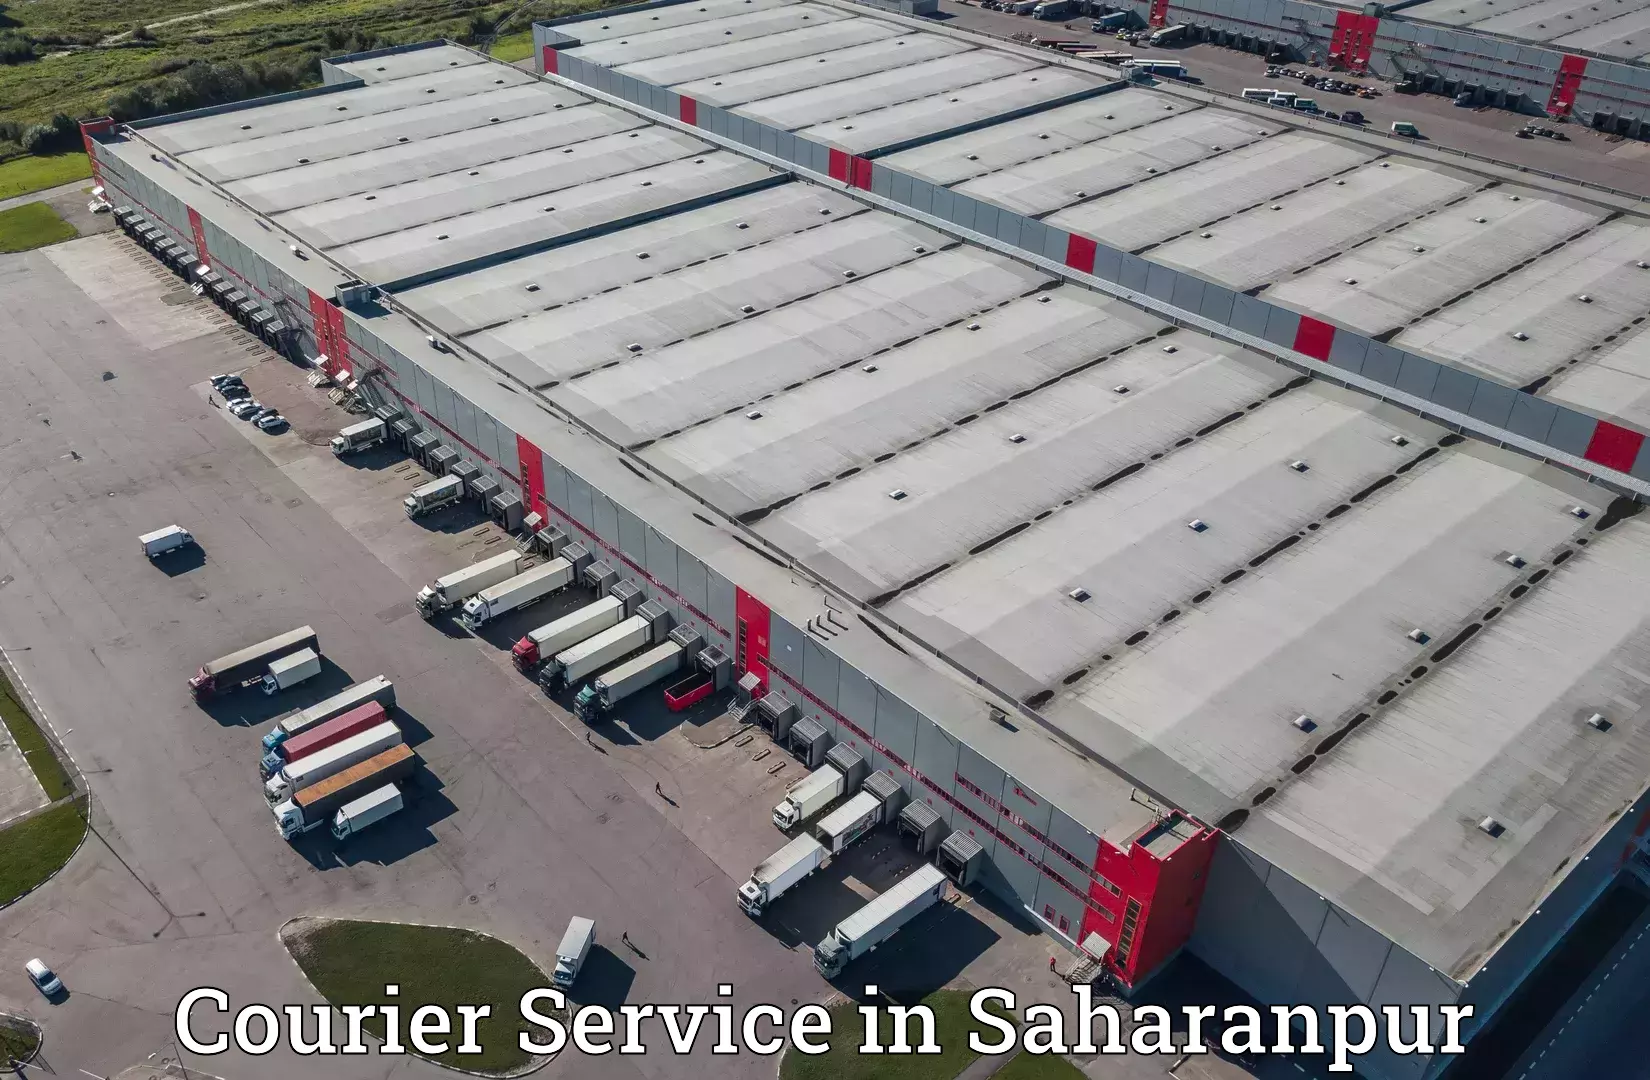 Streamlined delivery processes in Saharanpur